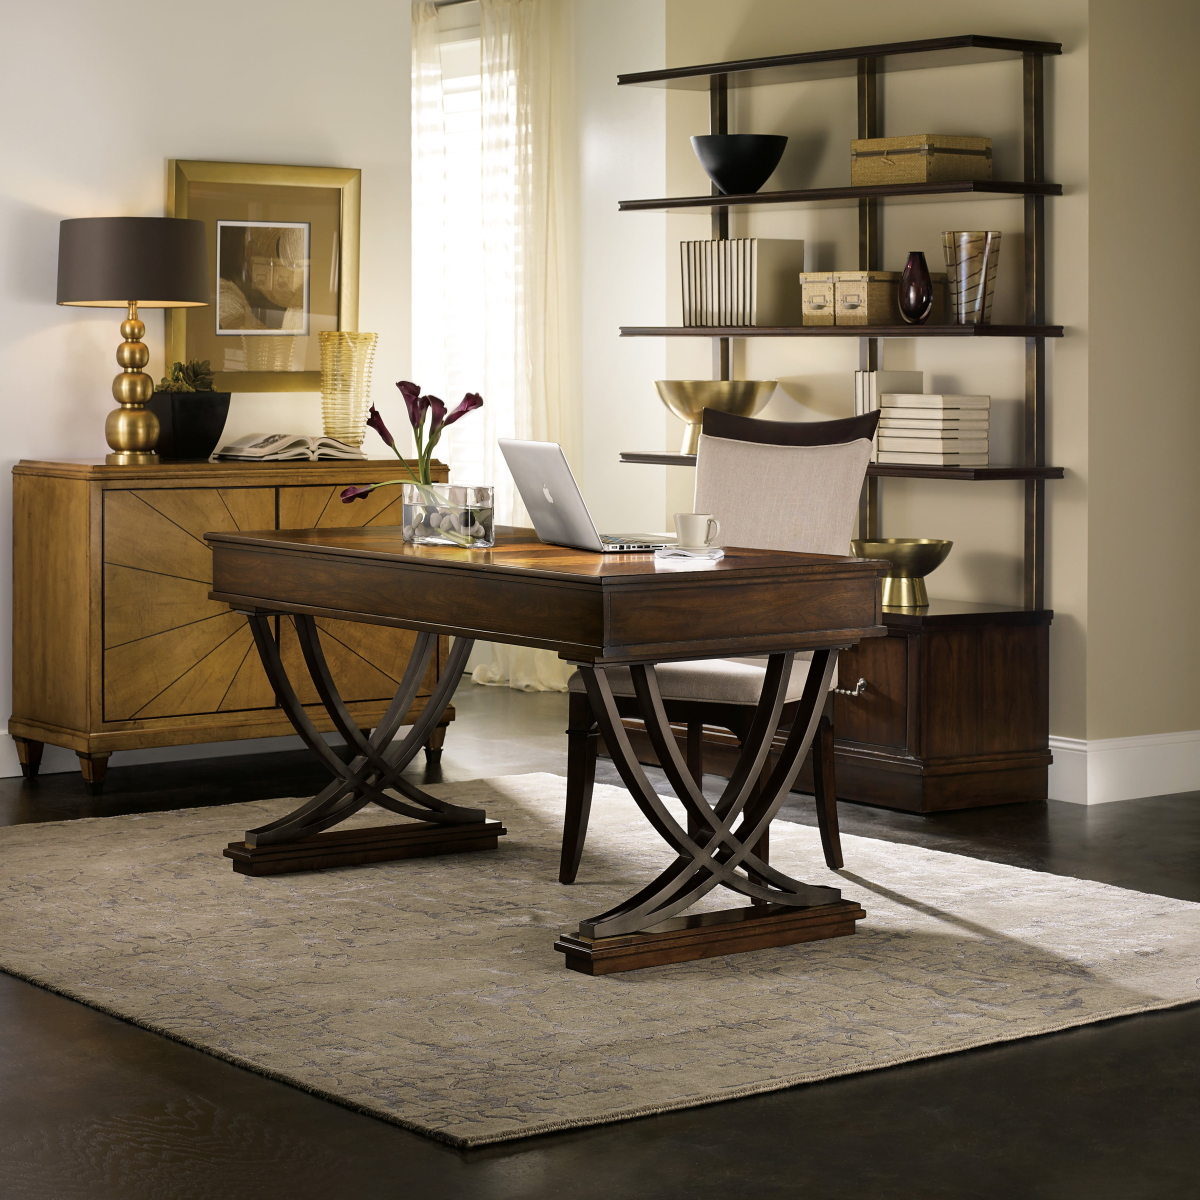 Home Office Writing Desk | AgathaO™ - House of Design